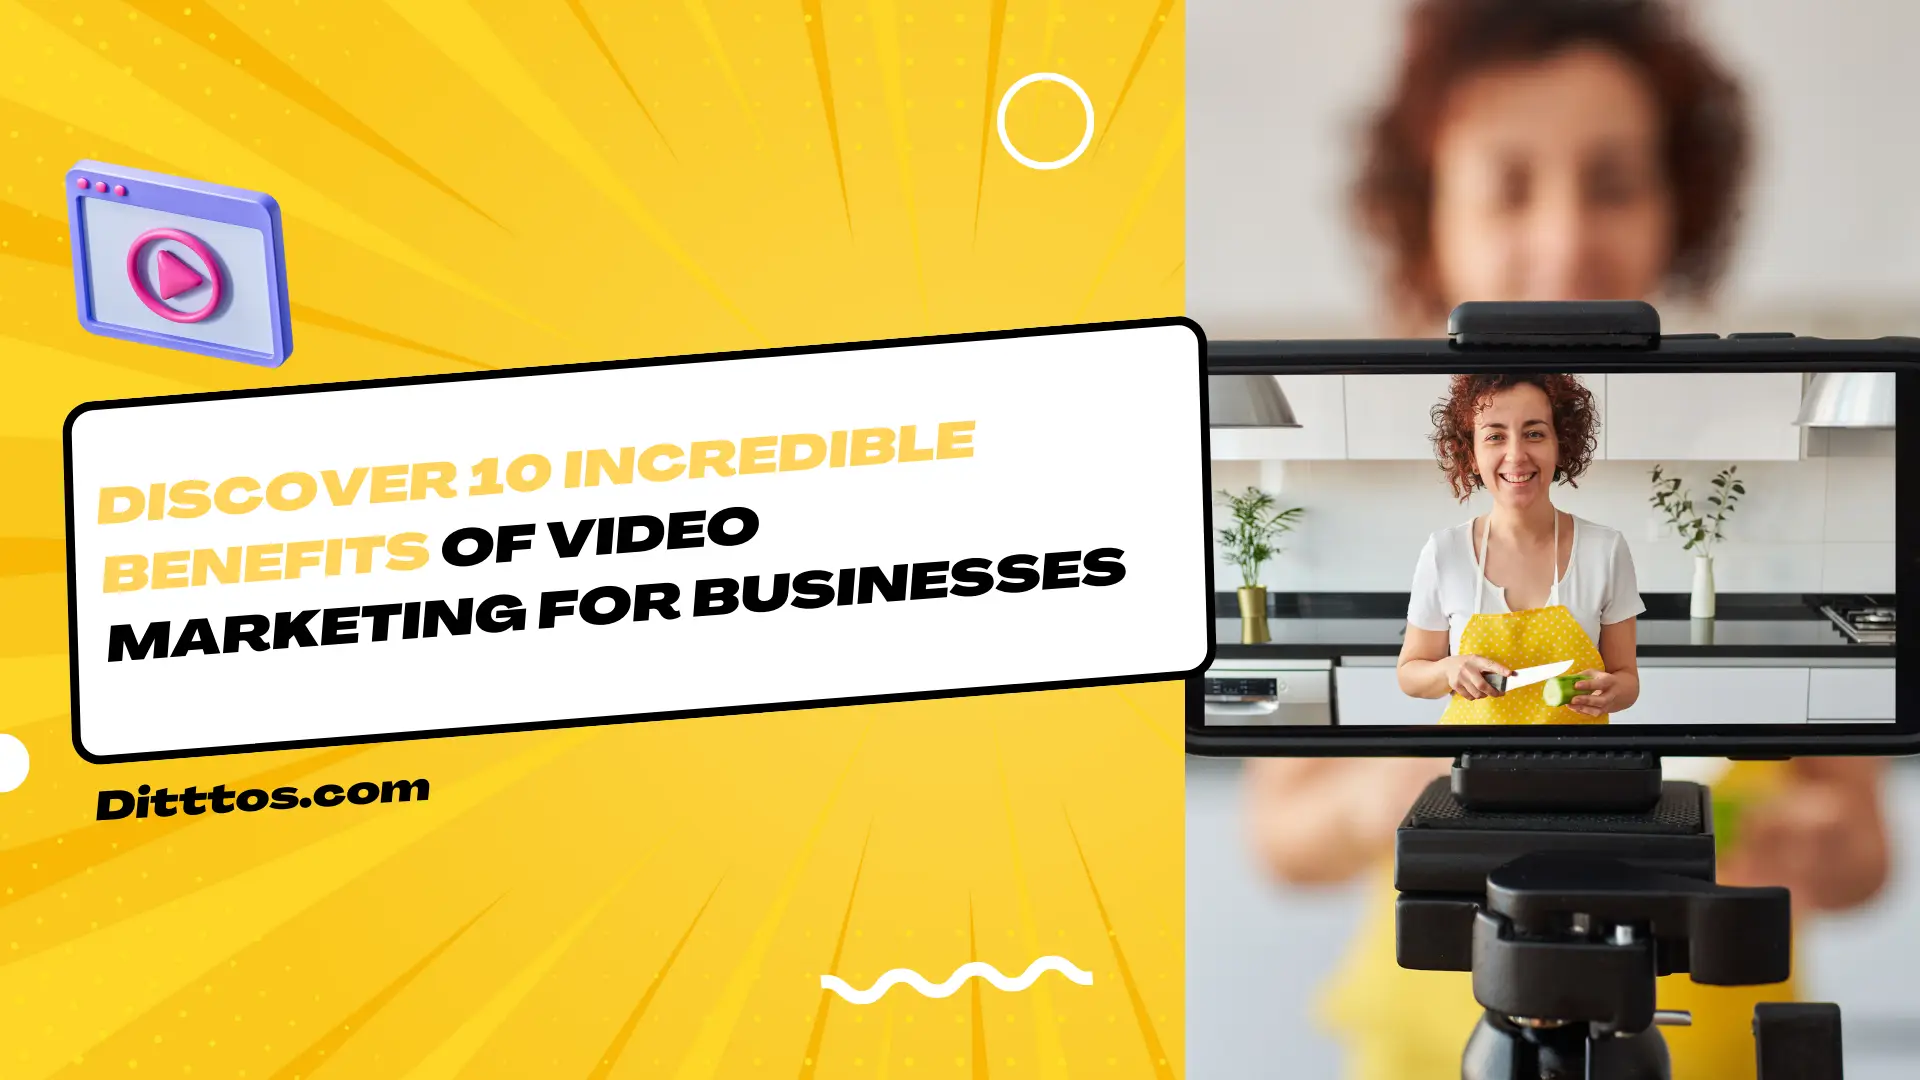 Discover 10 Incredible Benefits of Video Marketing for Businesses